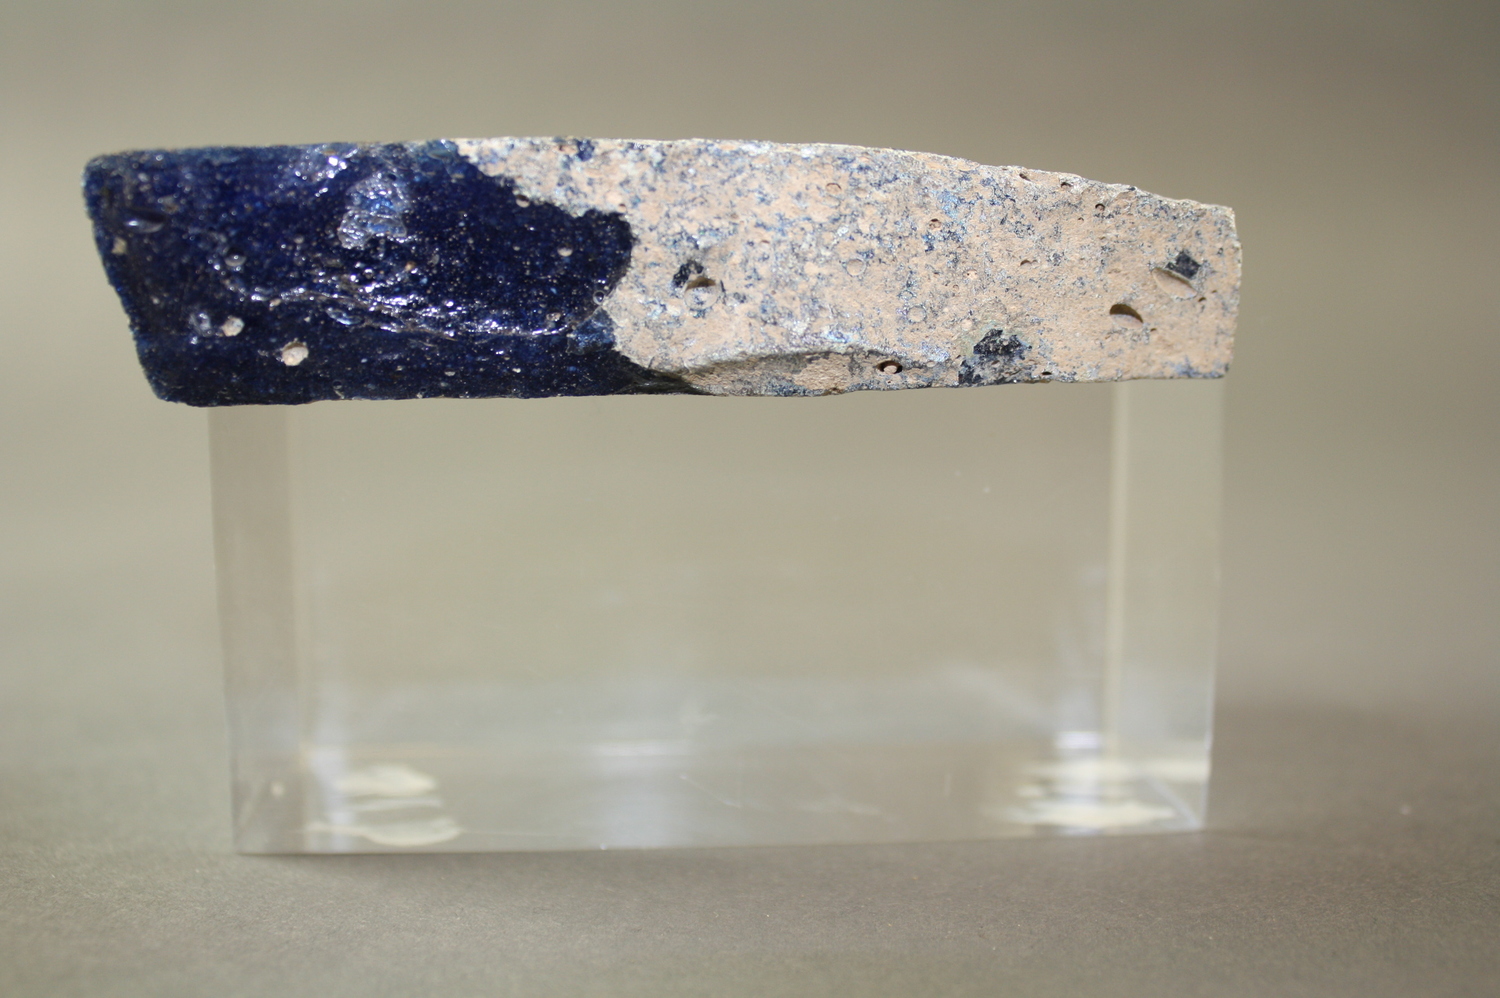 Side view of the slab. The dark blue color of the glass is most visible from this view.